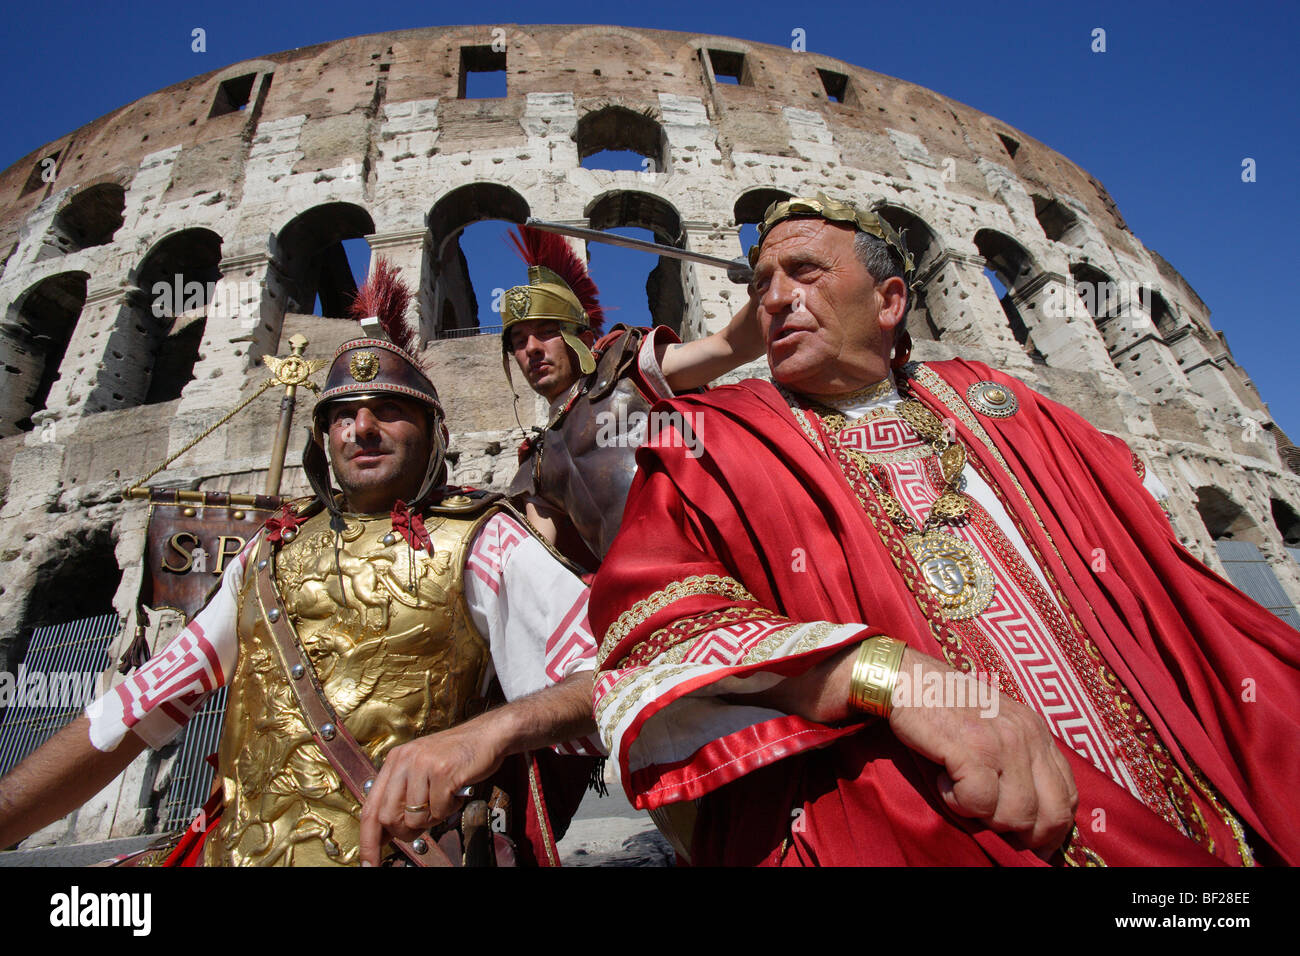 Actors in costumes in front of the colosseum, Rome, Italy, Europe Stock Photo